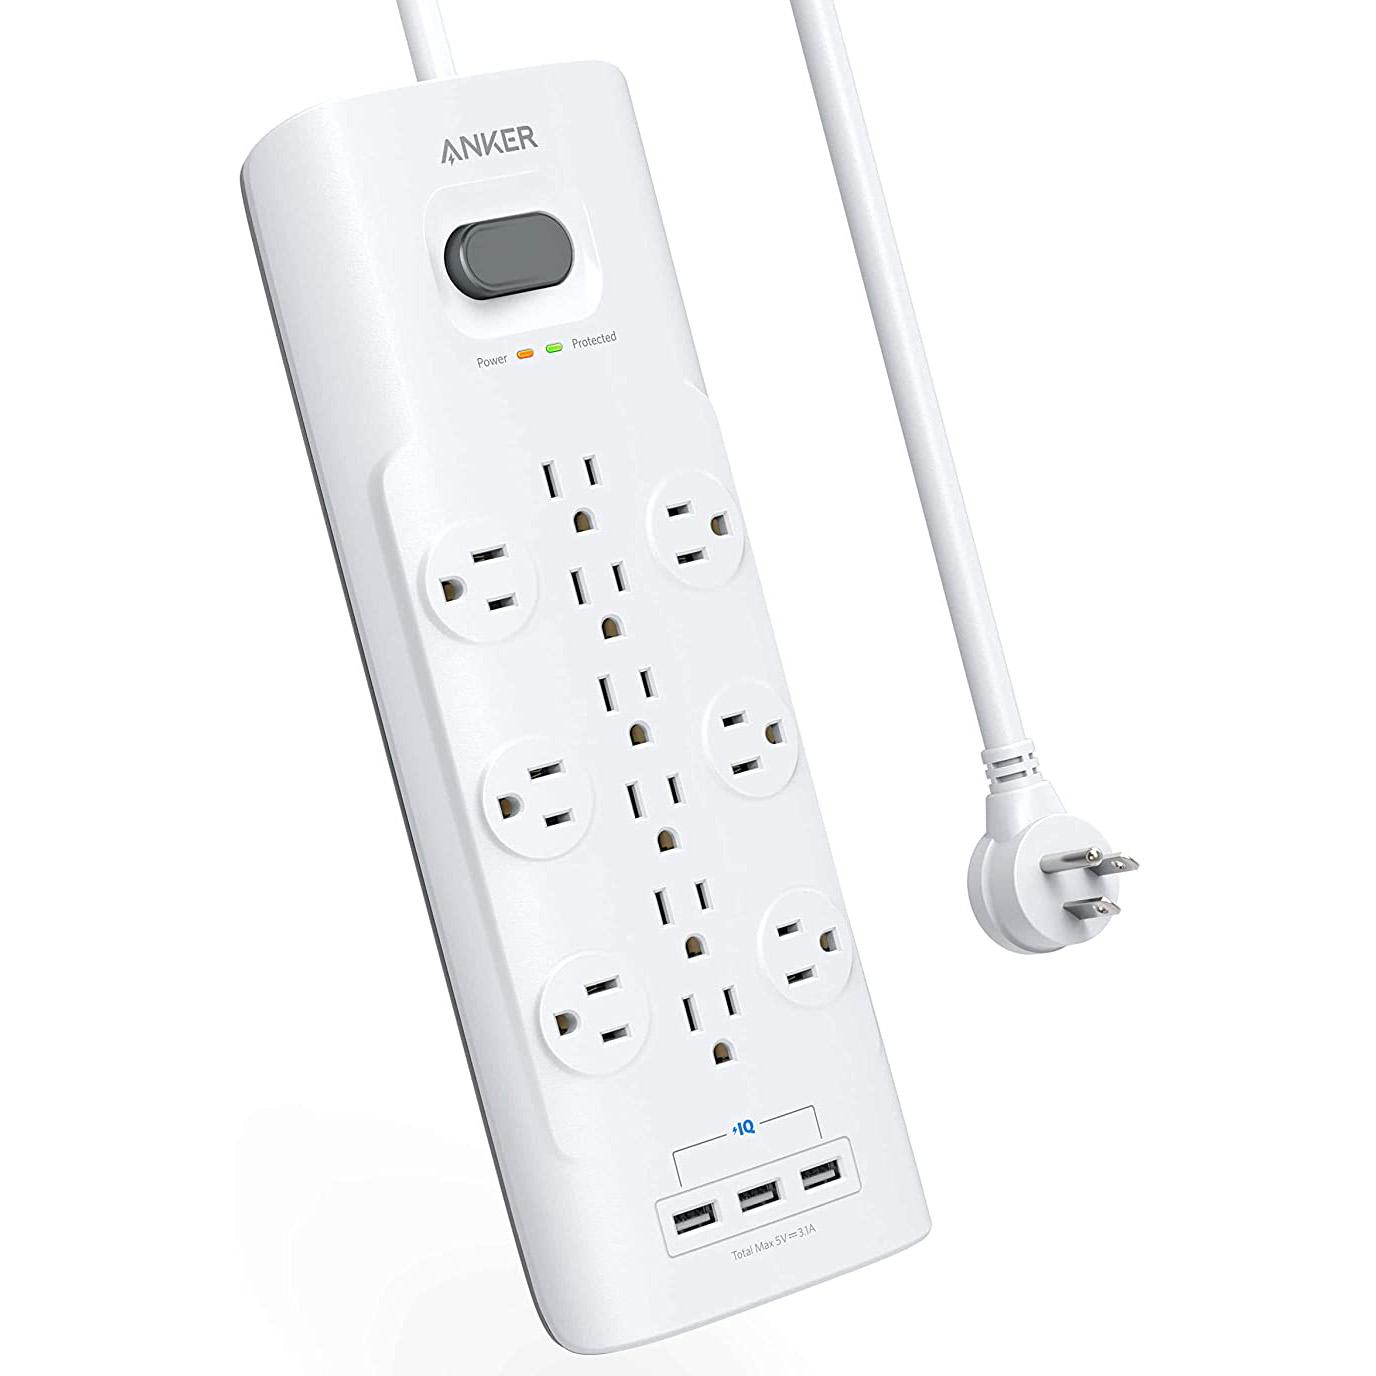 Anker 4000 Joules Flat Plug Surge Protector for $19.99